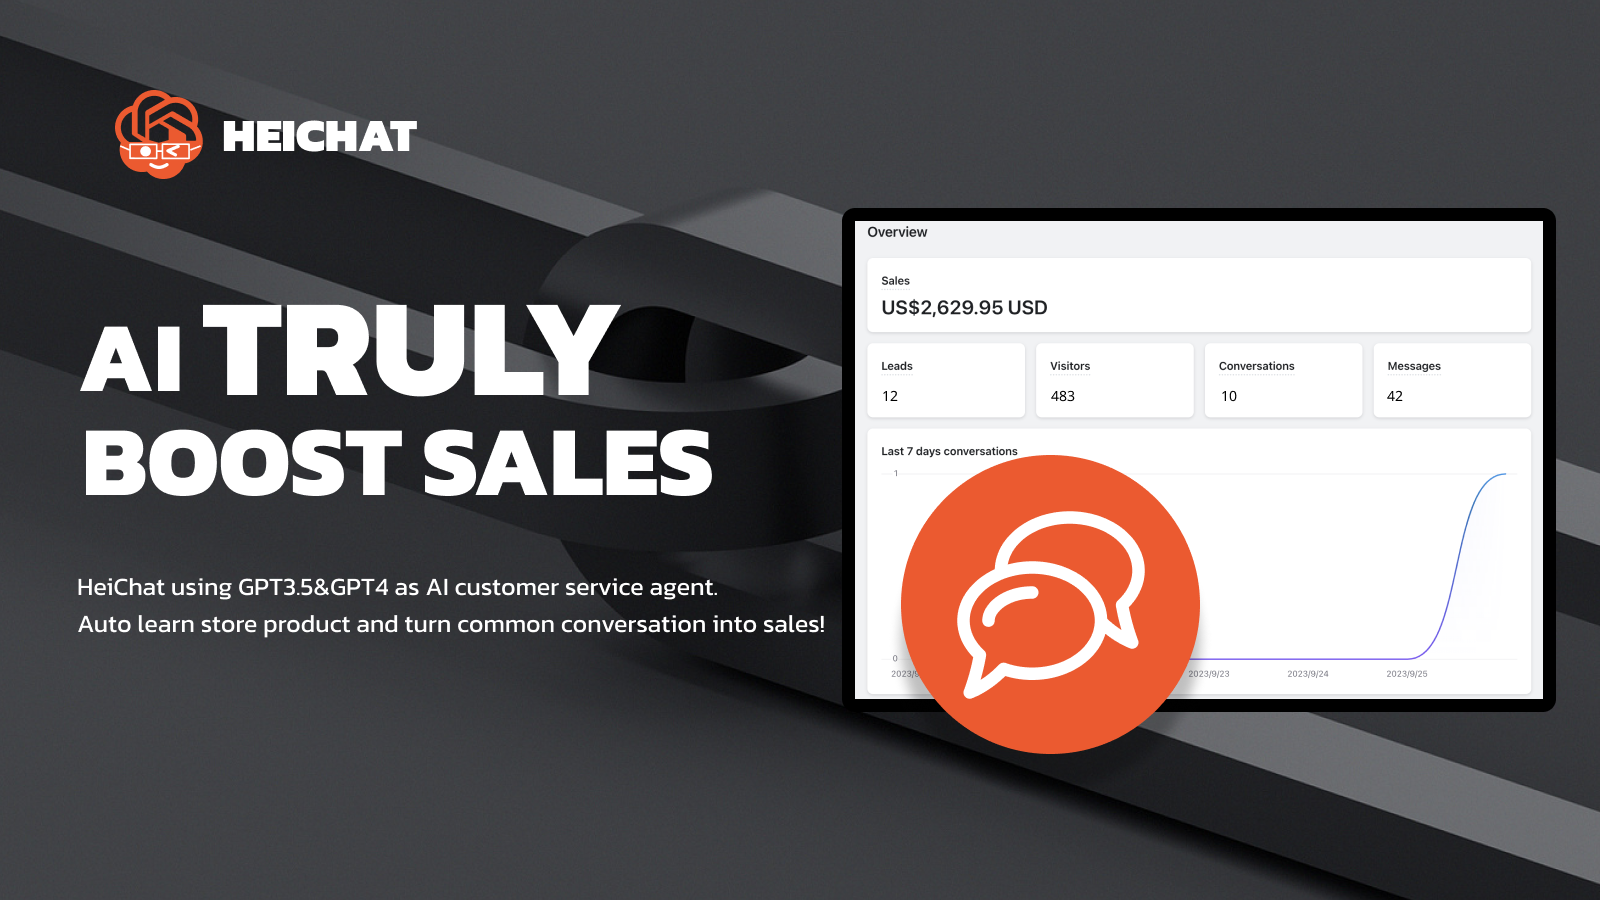 Auto learn store product and turn common conversation into sales